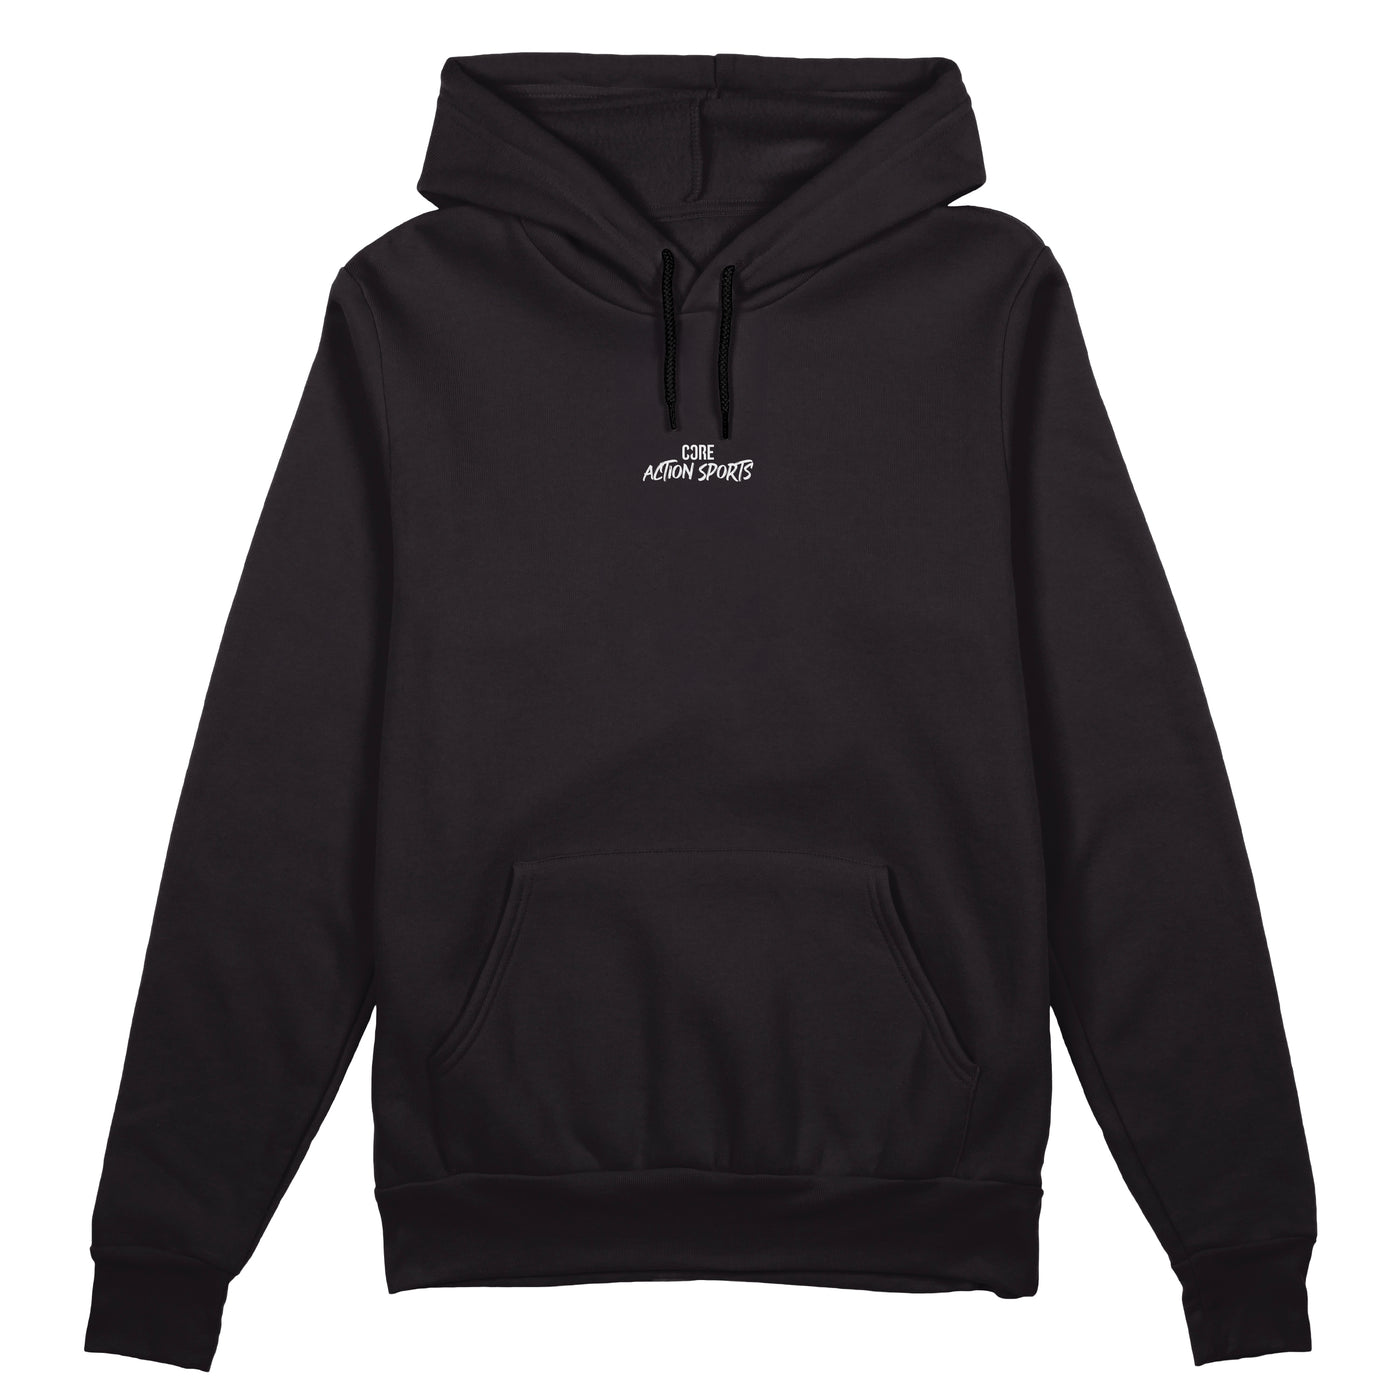 CORE Action Sports Hoodie – Black/White